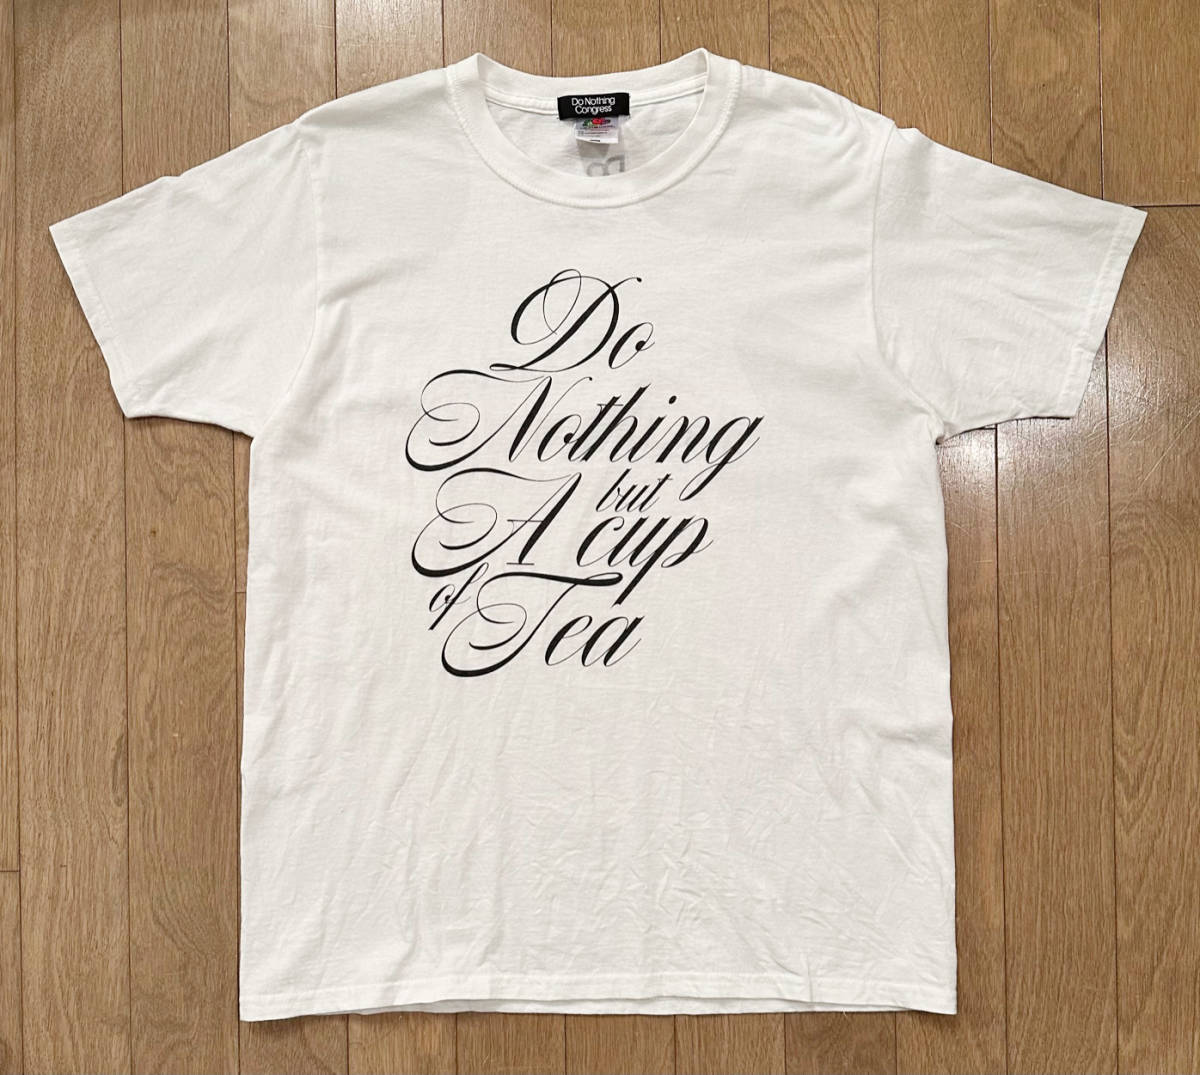 ■Do Nothing Congress “Do Nothing but A Cup of Tea” Tシャツ WH-M Fragment 藤原ヒロシの画像1